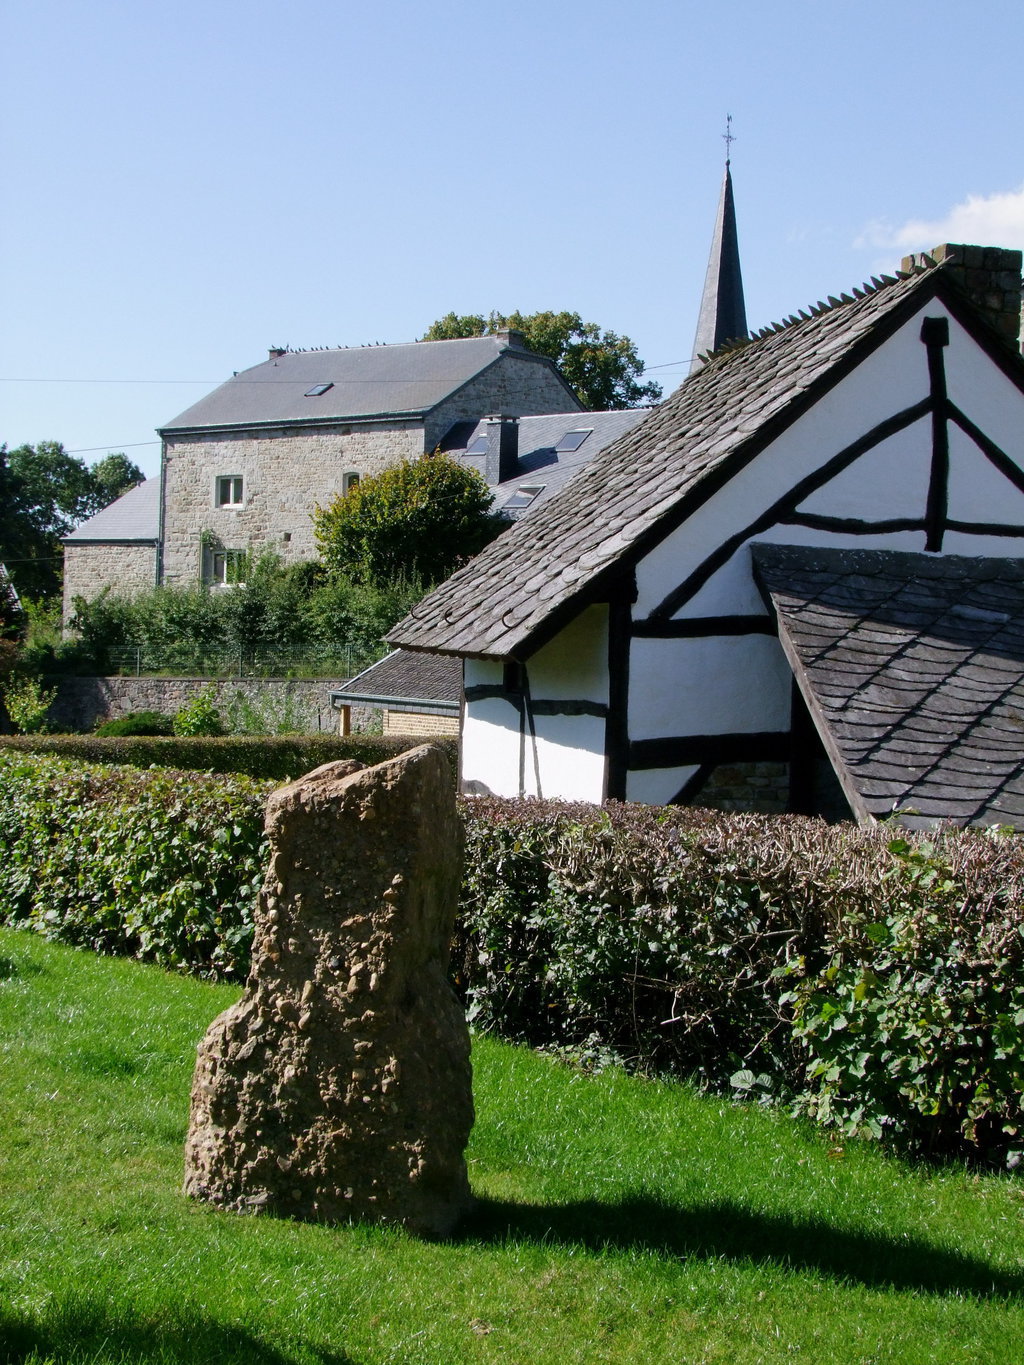 Soon after its discovery in 2012, the stone has been moved to the lawn of the 